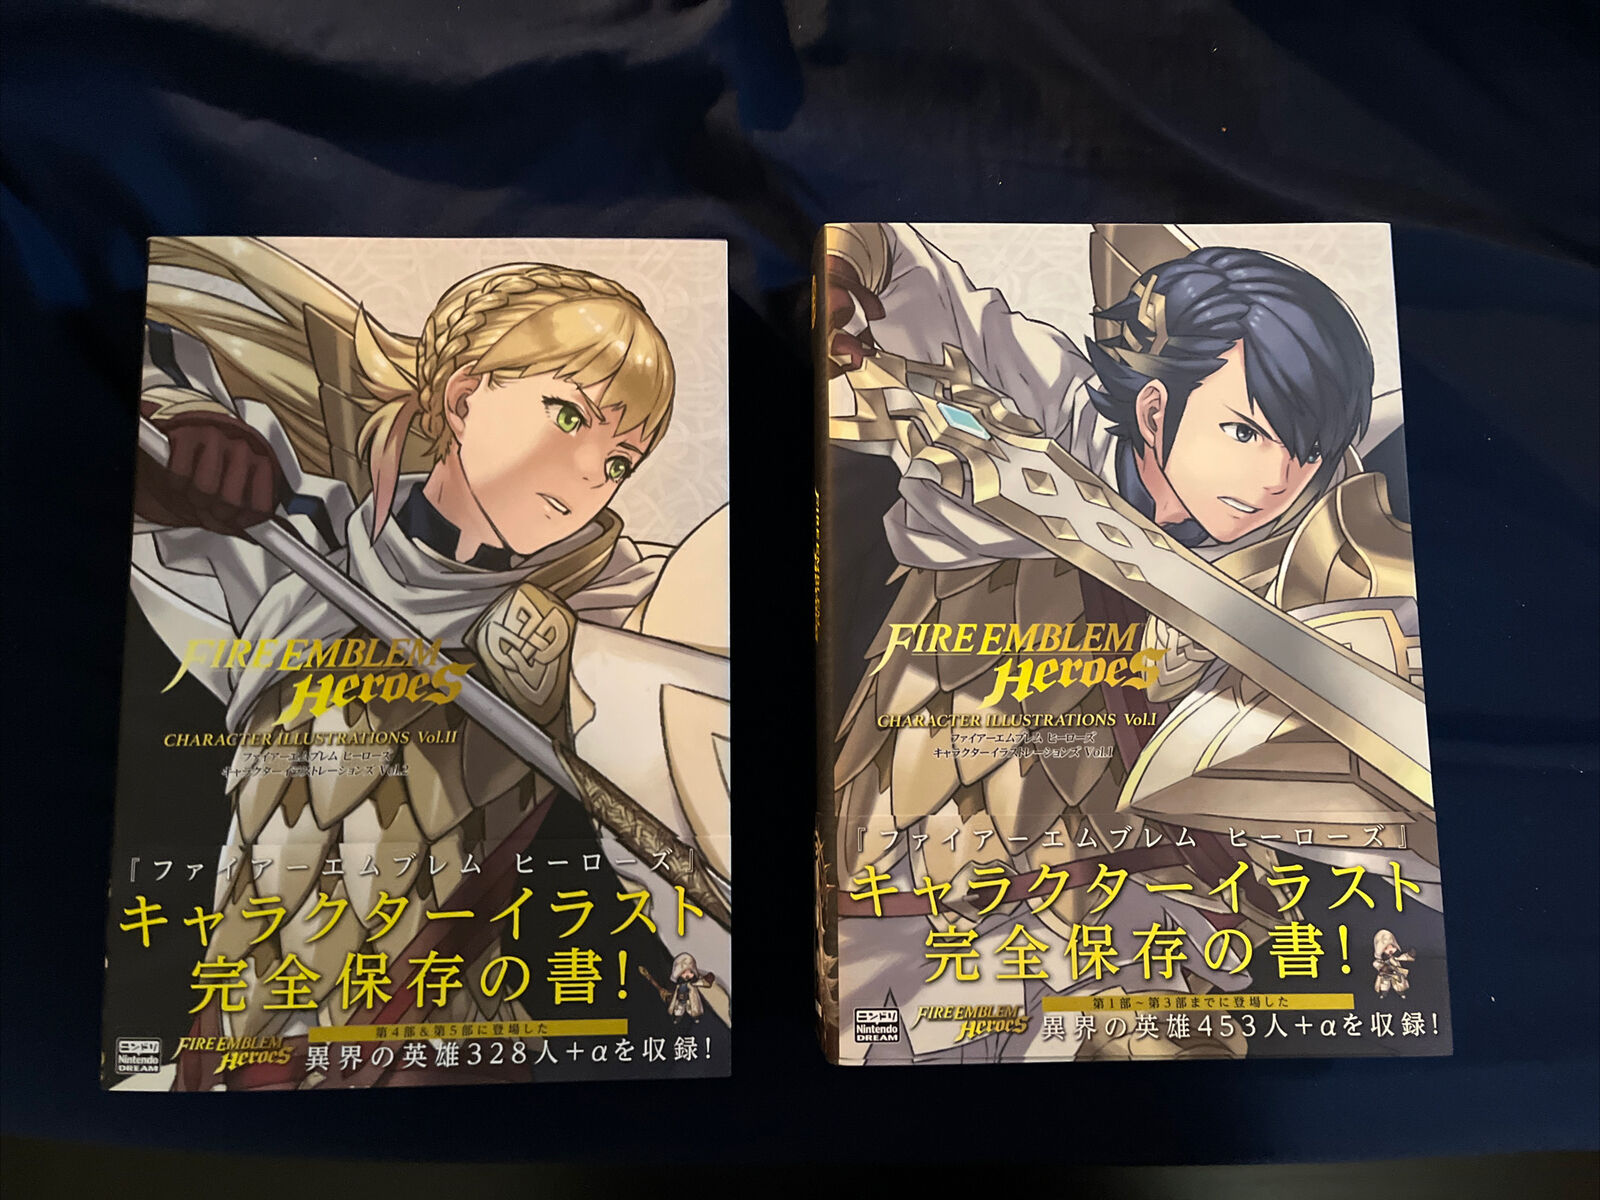 Fire Emblem Heroes Character Illustrations Vol 1 & 2 Art Work Books - 1104 Pages